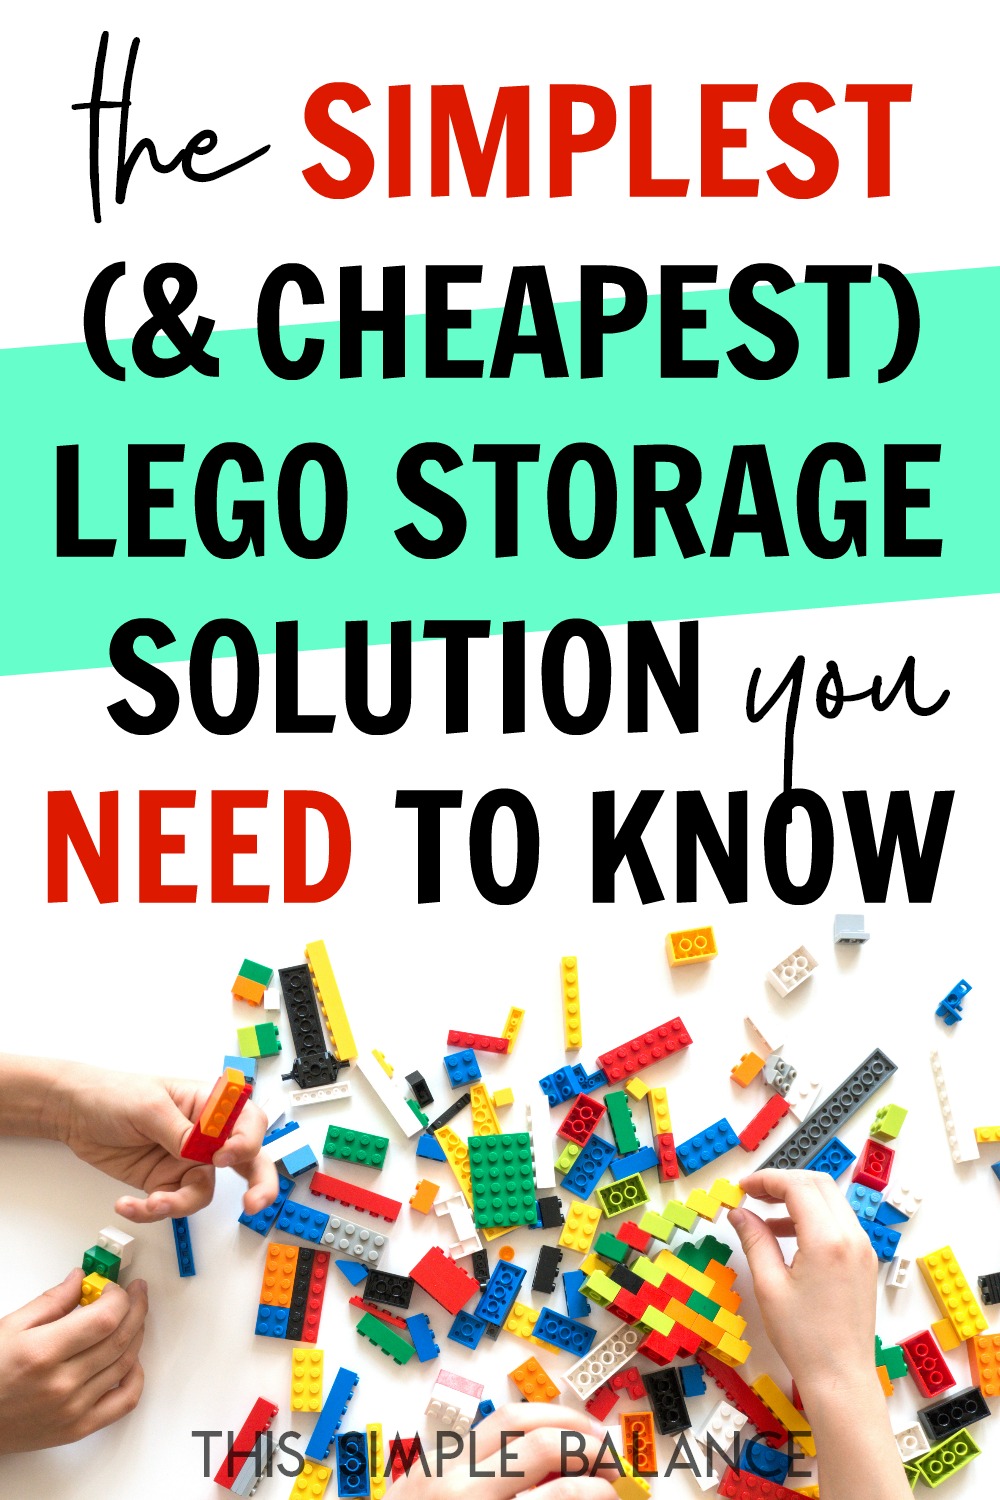 white tabletop covered with lego bricks, kid hands holding bricks, with text overlay "the simplest (& cheapest) lego storage solution you need to know"